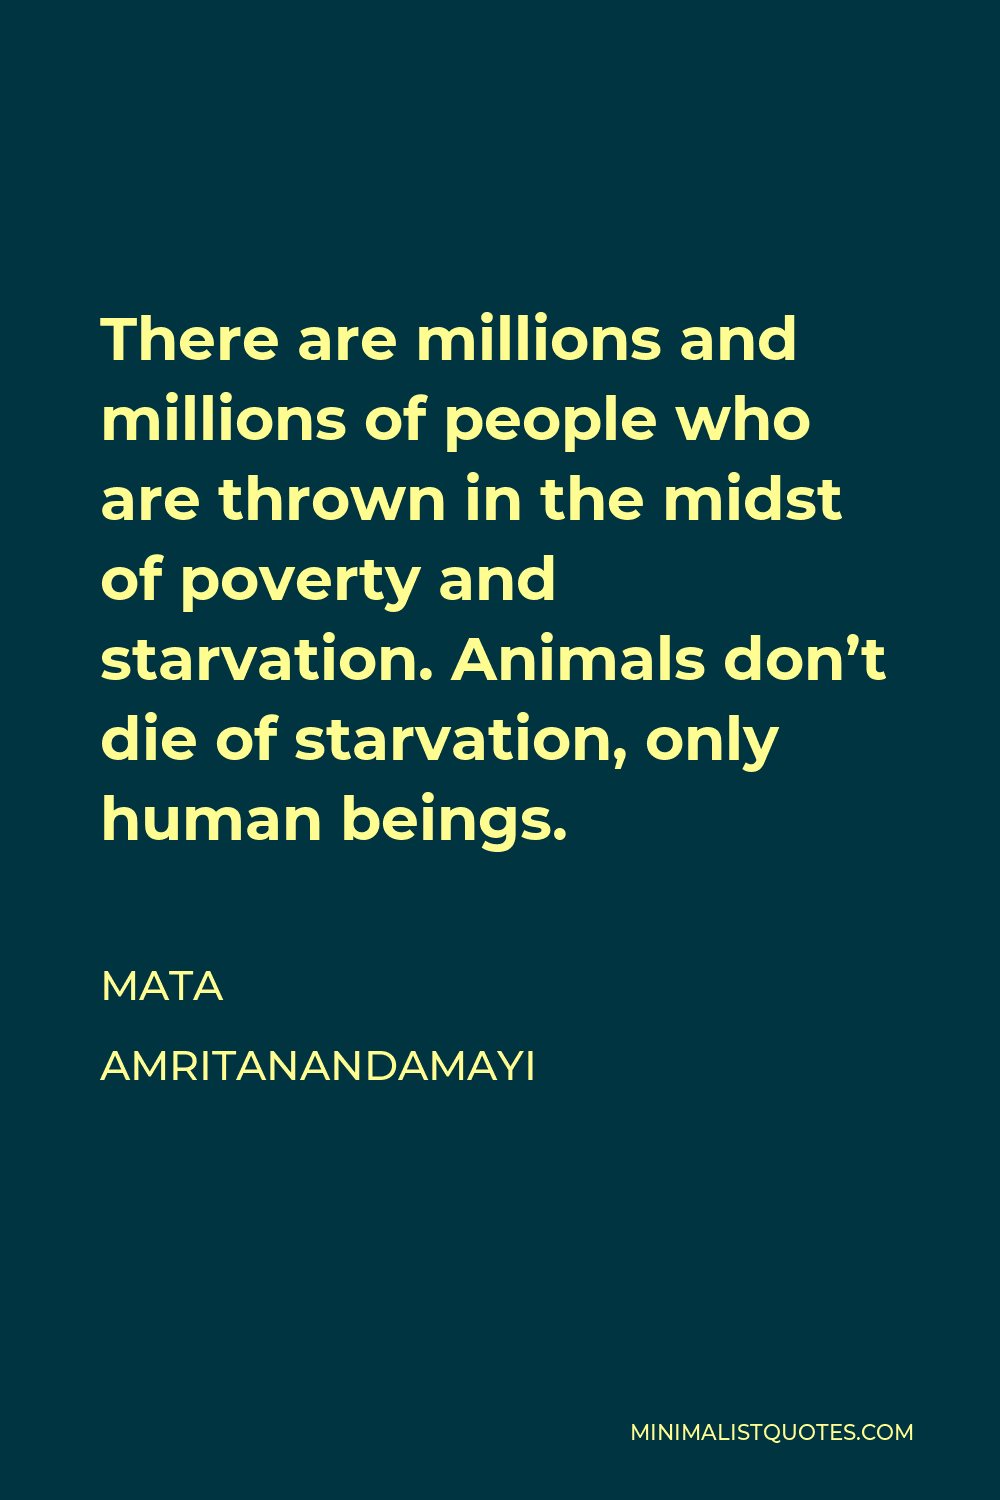 Mata Amritanandamayi Quote - There are millions and millions of people who are thrown in the midst of poverty and starvation. Animals don’t die of starvation, only human beings.